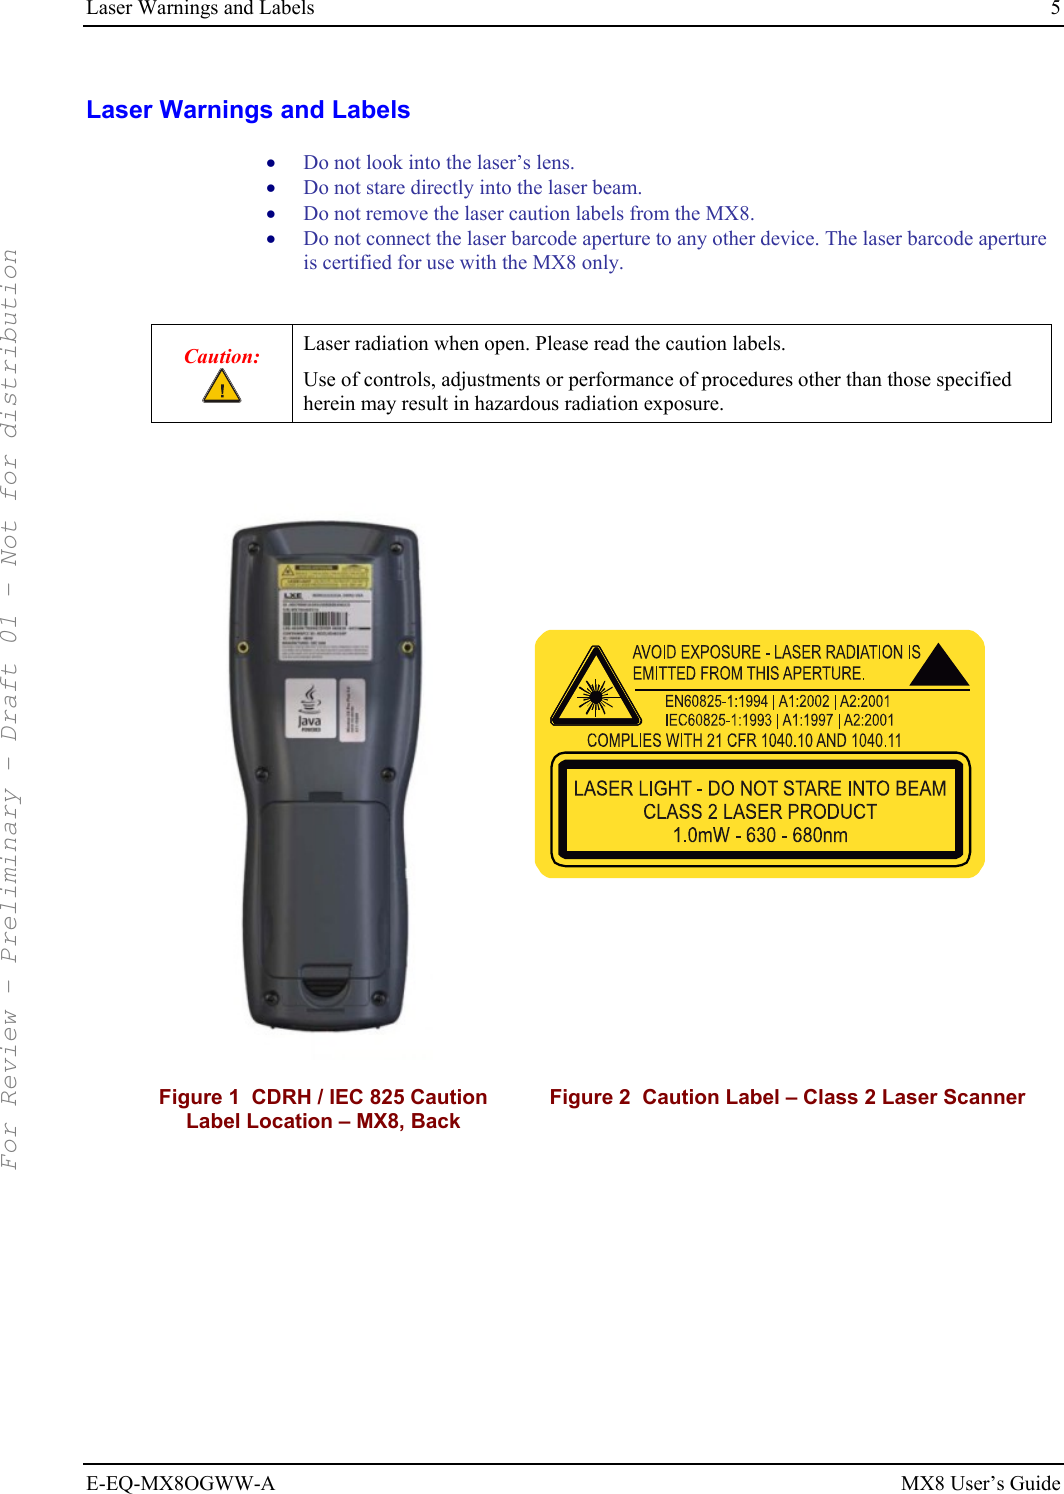 Laser Warnings and Labels  5 E-EQ-MX8OGWW-A MX8 User’s Guide Laser Warnings and Labels • Do not look into the laser’s lens. • Do not stare directly into the laser beam.  • Do not remove the laser caution labels from the MX8.  • Do not connect the laser barcode aperture to any other device. The laser barcode aperture is certified for use with the MX8 only.  Caution:  Laser radiation when open. Please read the caution labels. Use of controls, adjustments or performance of procedures other than those specified herein may result in hazardous radiation exposure.     Figure 1  CDRH / IEC 825 Caution Label Location – MX8, Back Figure 2  Caution Label – Class 2 Laser Scanner  For Review - Preliminary - Draft 01 - Not for distribution 